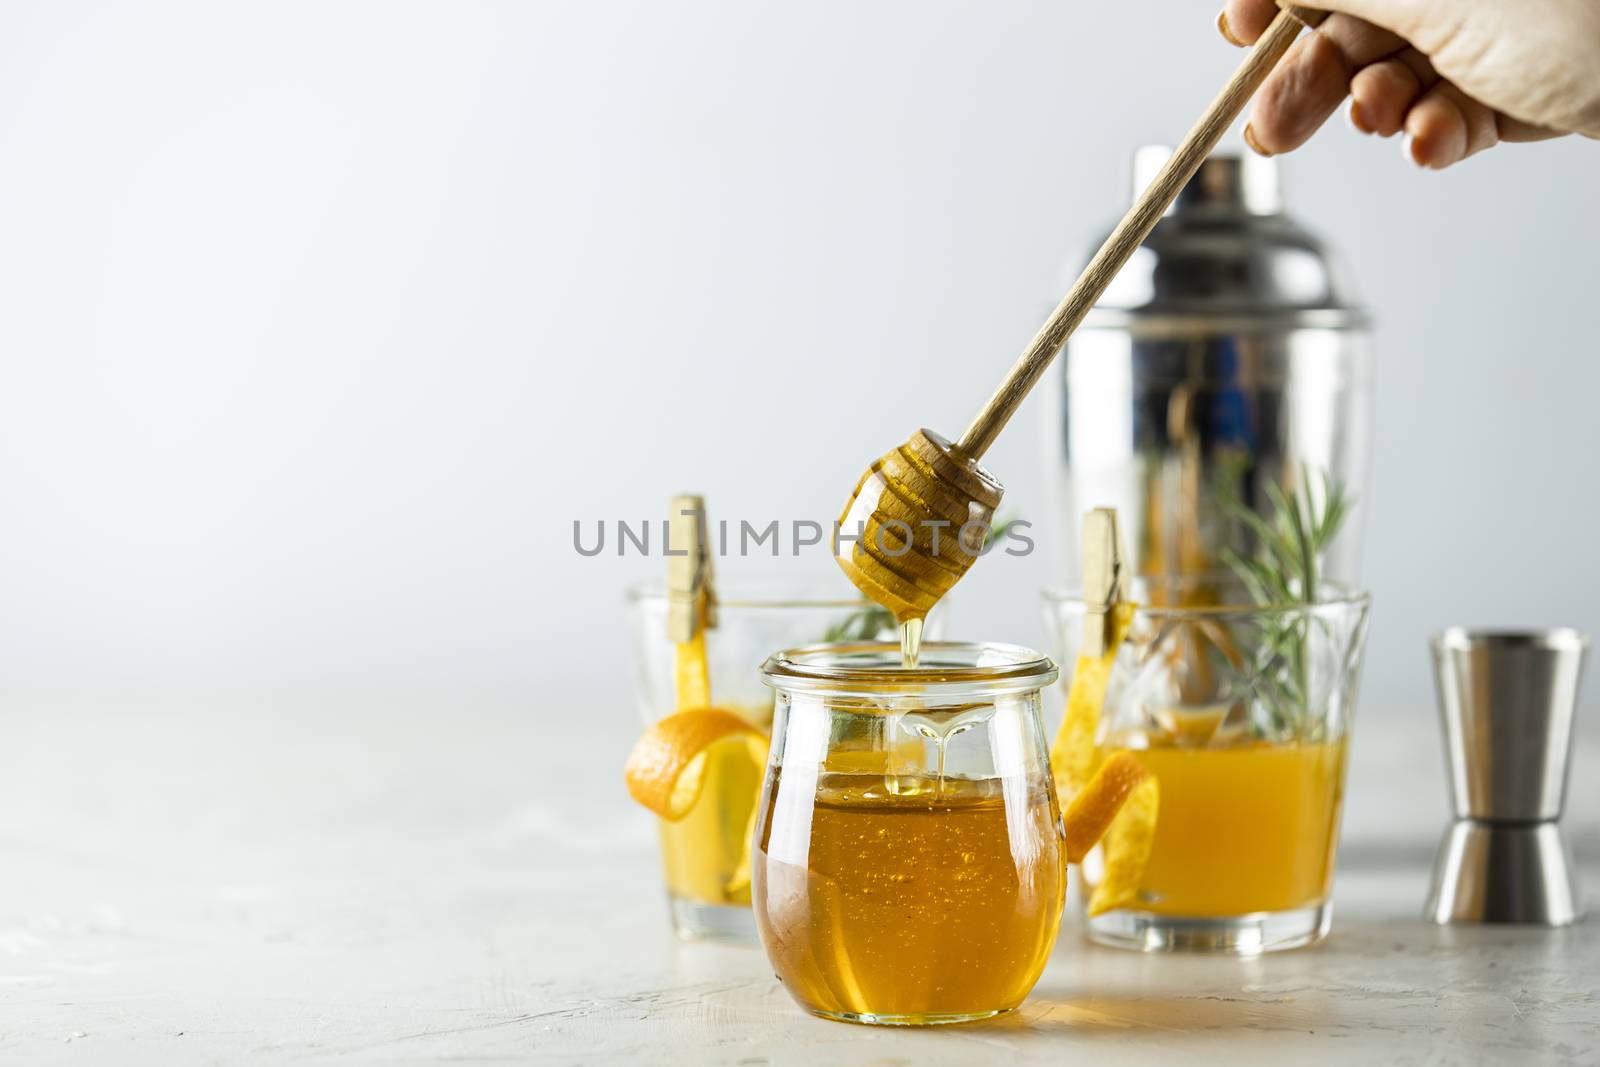 Woman hand holds a spoon for honey over jar in front of two glas by ArtSvitlyna